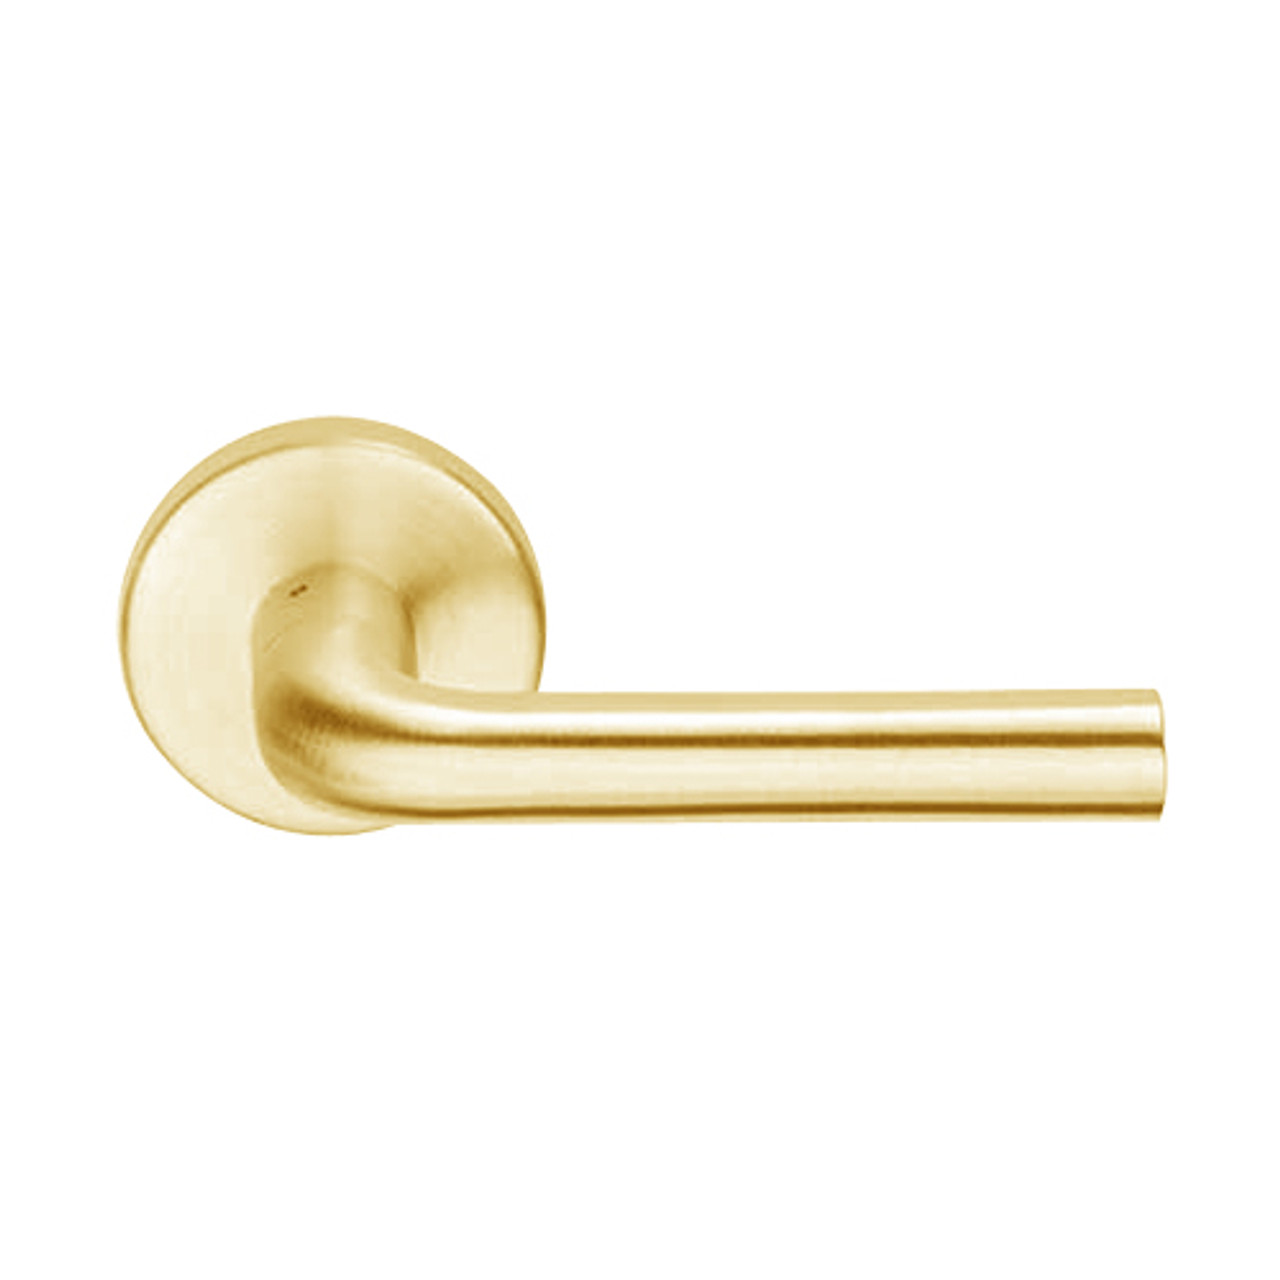 L9060J-02A-605 Schlage L Series Apartment Entrance Commercial Mortise Lock with 02 Cast Lever Design Prepped for FSIC in Bright Brass